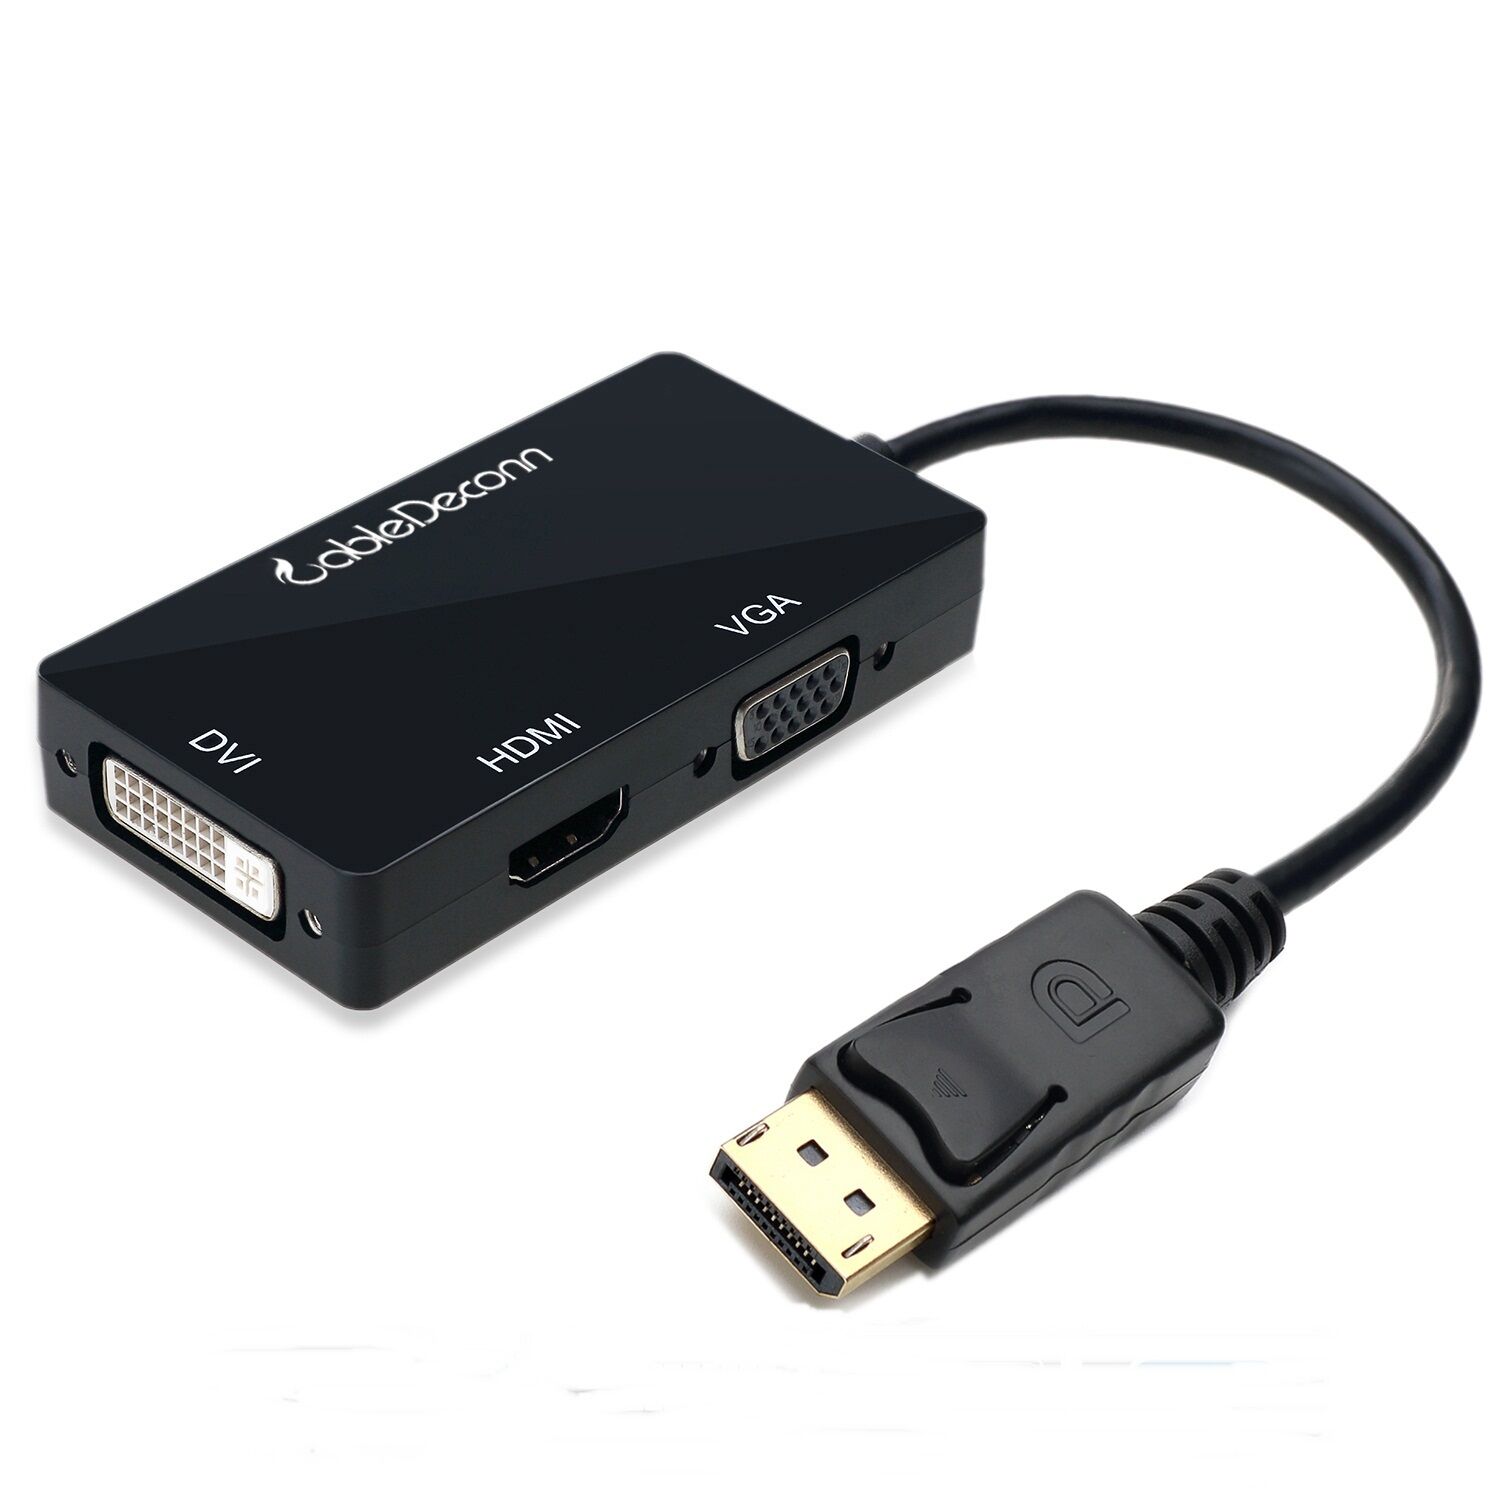 CABLEDECONN Multi-Function Displayport Dp to HDMI/DVI/VGA Male to Female 3-in-1 Adapter Converter Cable   M0401